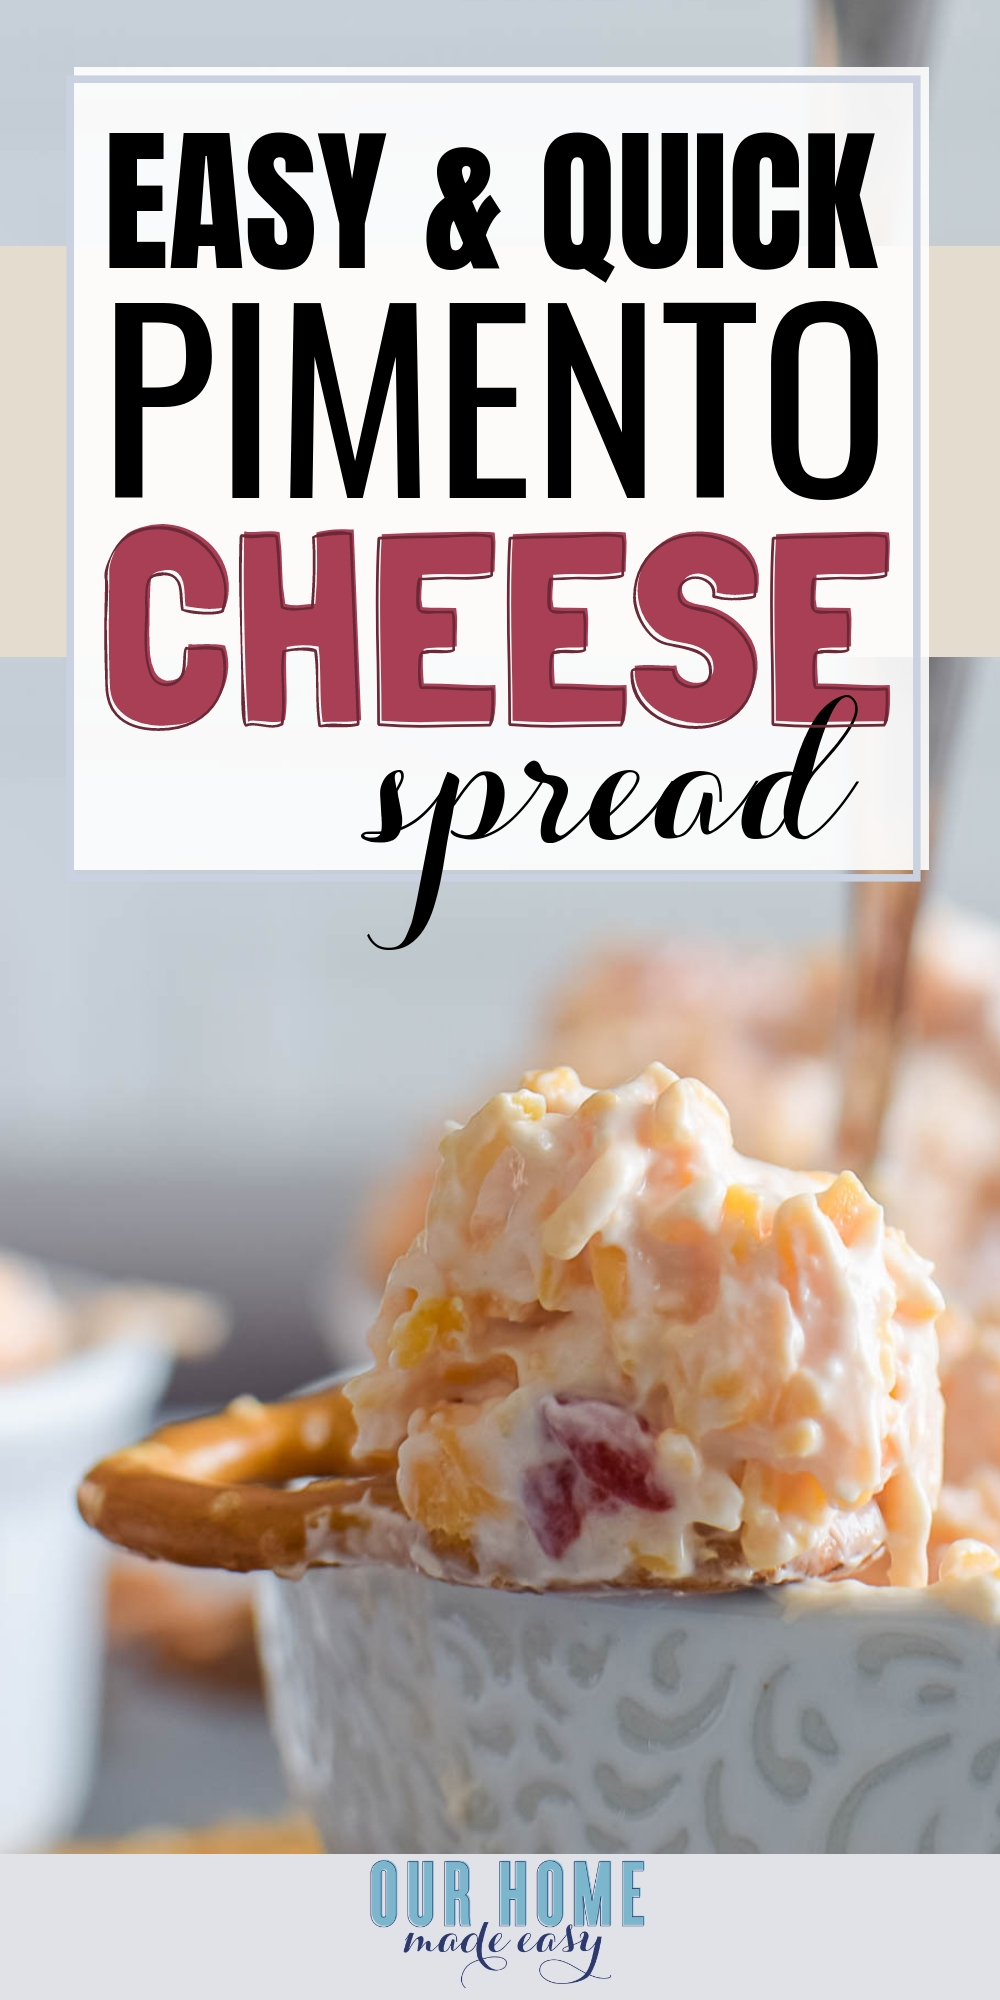 This yummy pimento cheese spread will WOW your guests at a party and it's SO easy to make ahead of time.